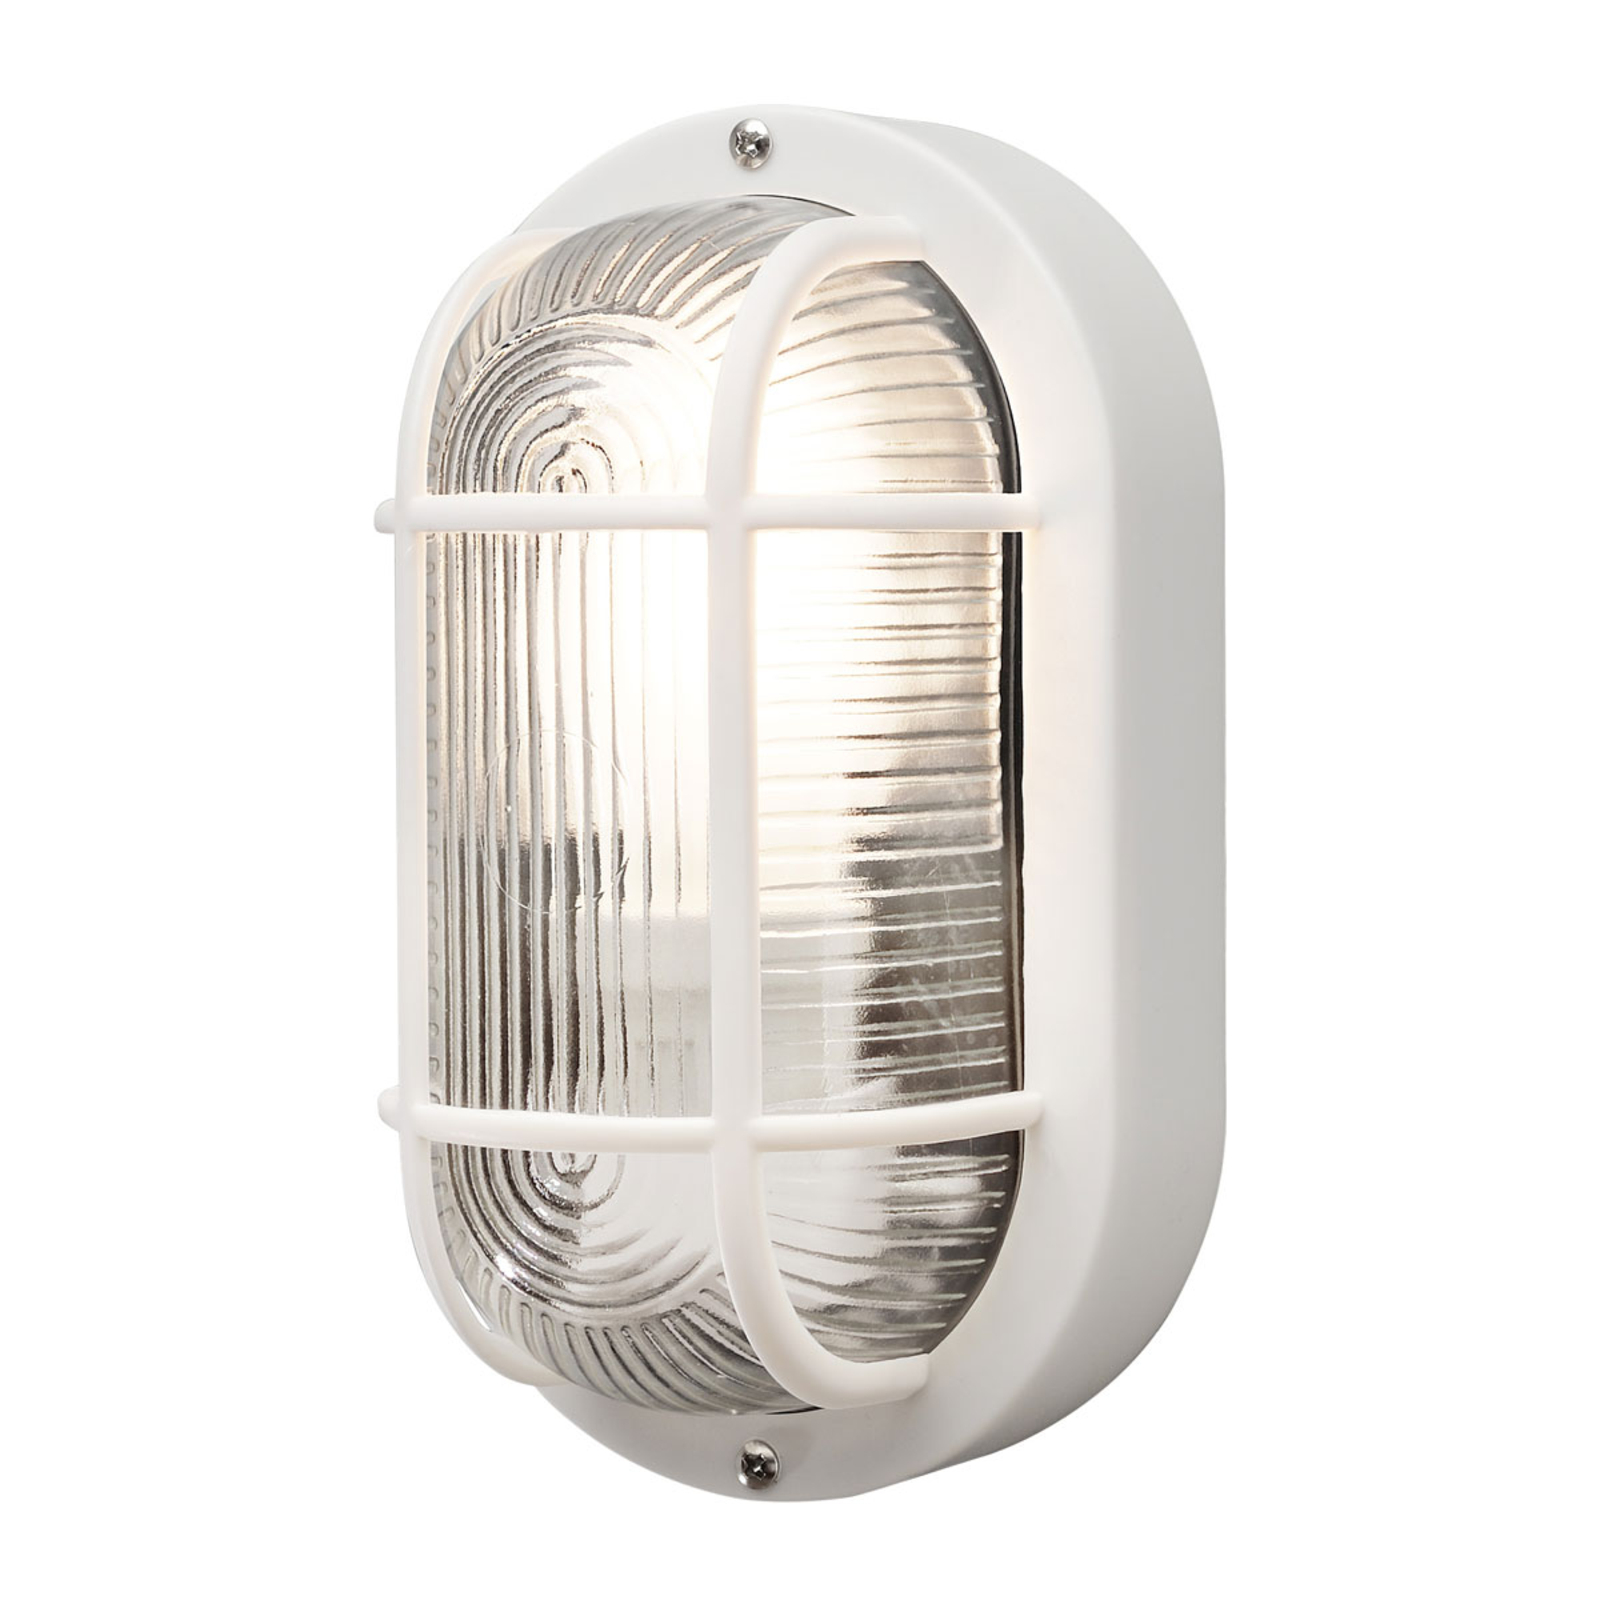 Elmas outdoor wall lamp, oval, white